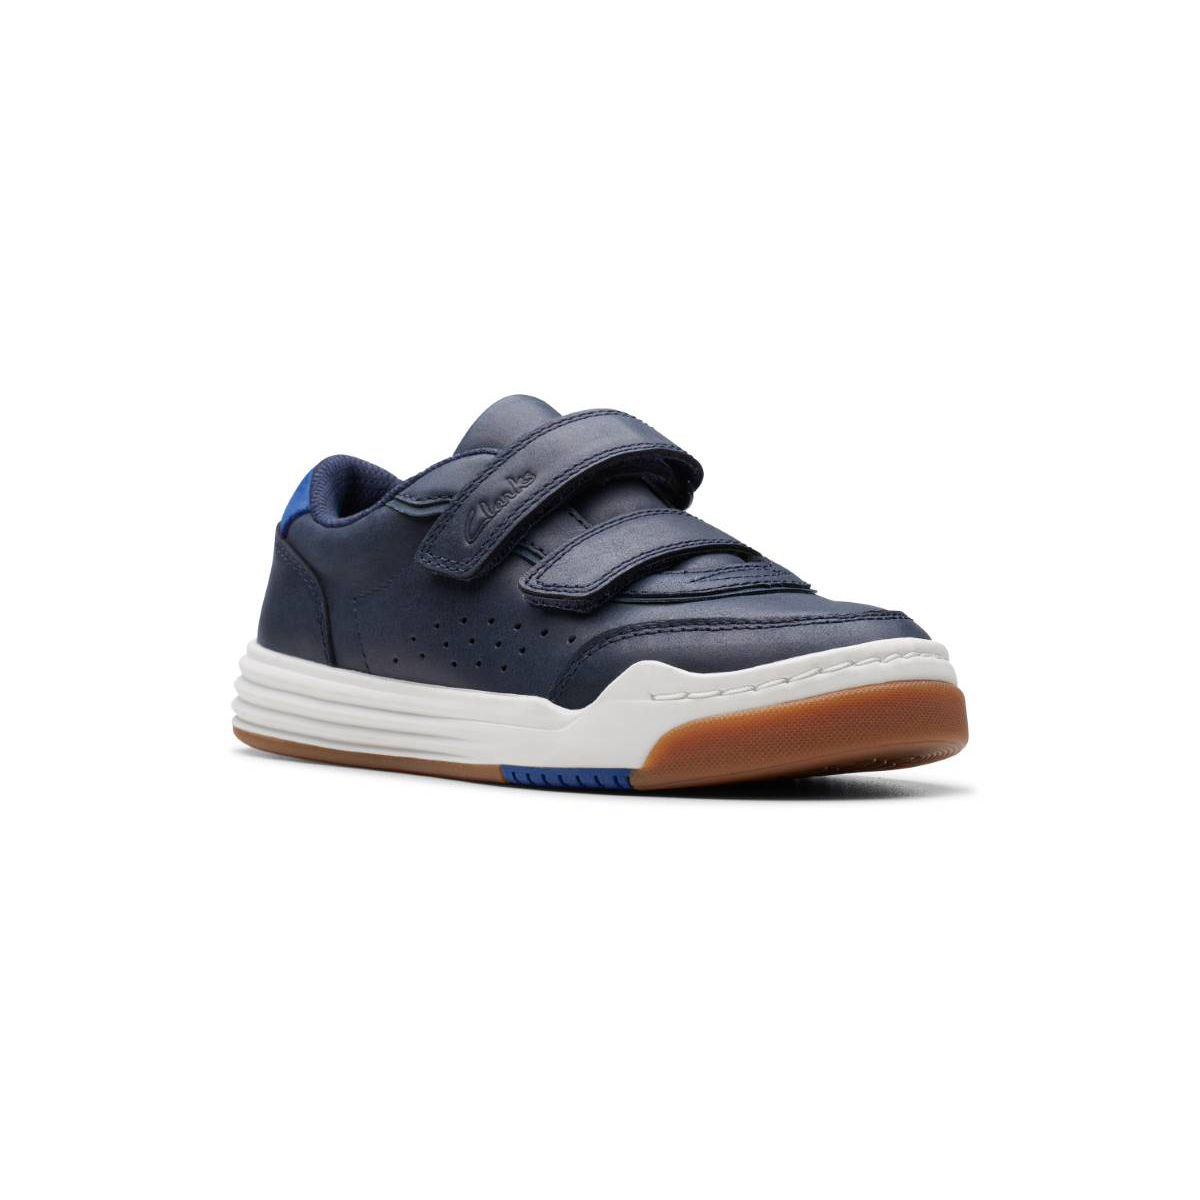 Clarks Urban Solo K Navy Leather Kids Boys Toddler Shoes 7666-06F in a Plain Leather in Size 9